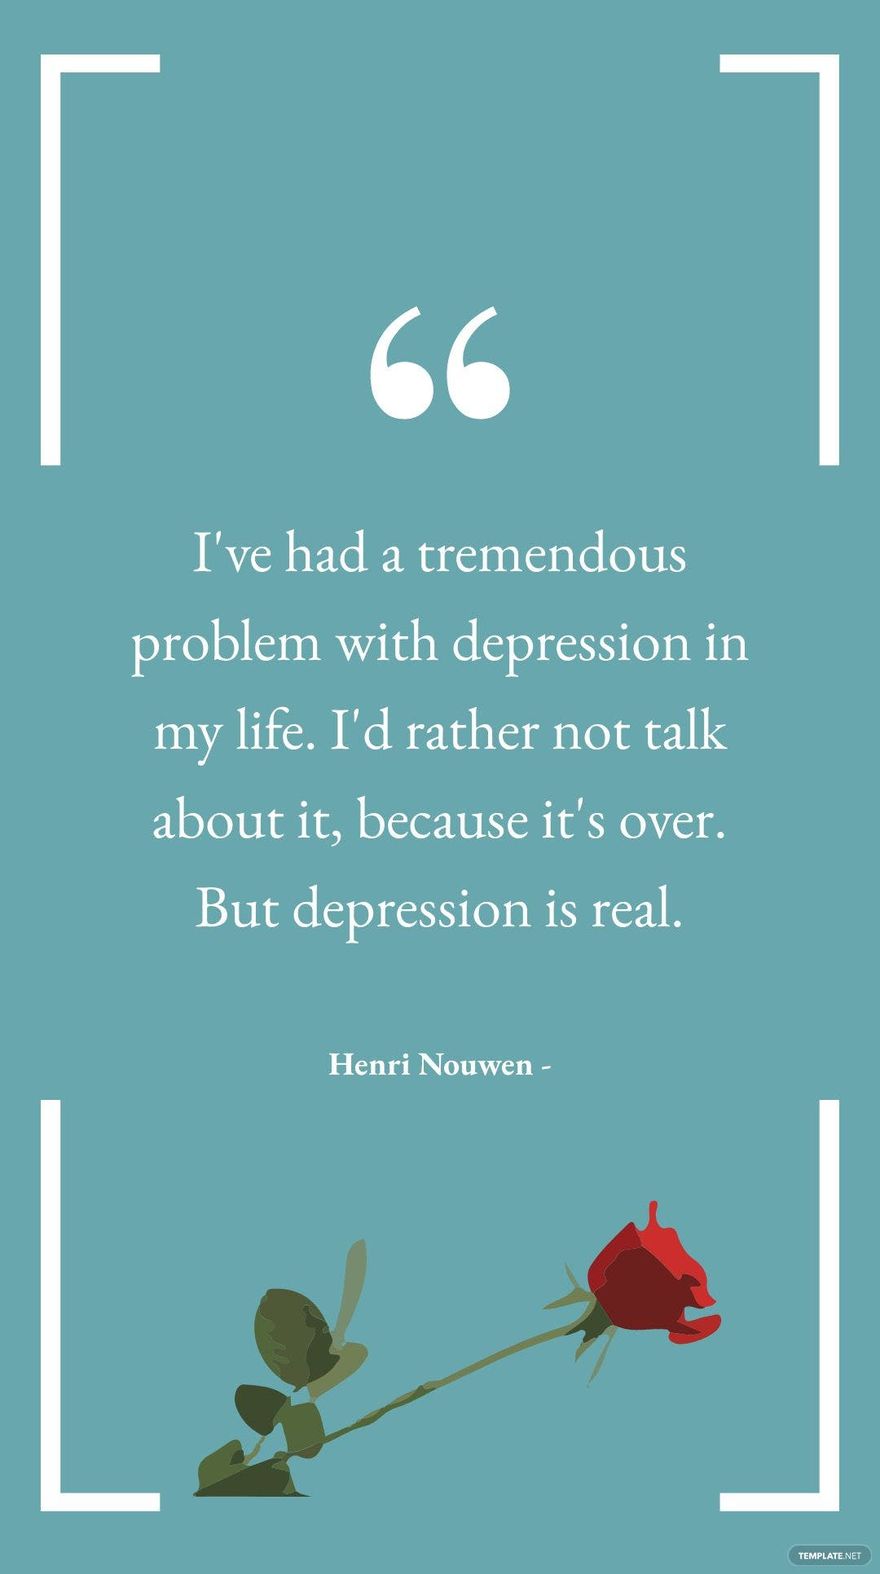 Henri Nouwen - I've had a tremendous problem with depression in my life. I'd rather not talk about it, because it's over. But depression is real.